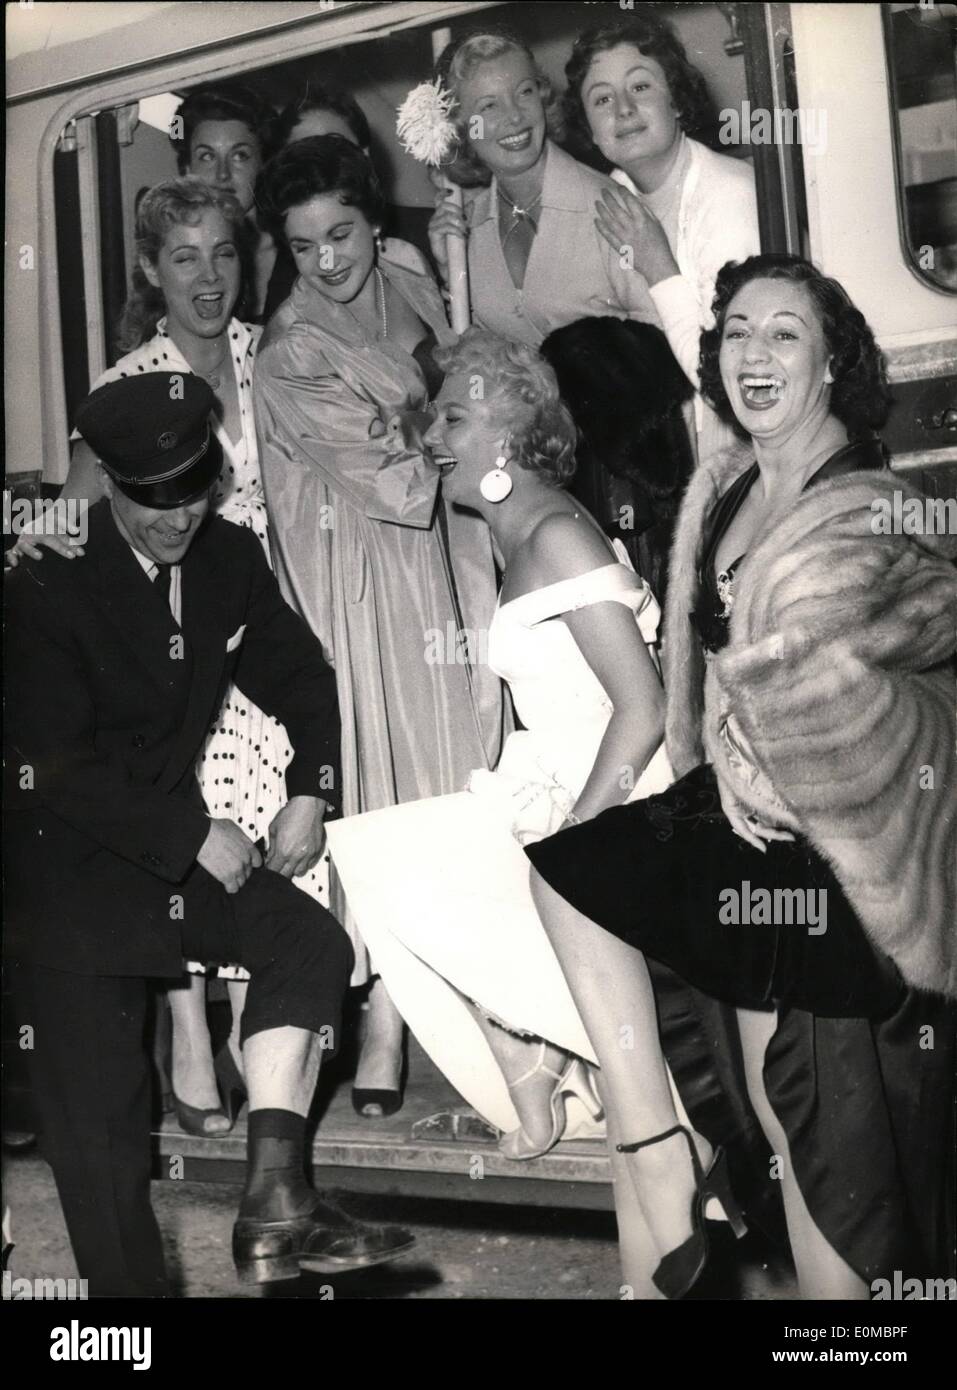 Jun. 06, 1954 - Crooner as bus conductor : Luis Mariano the famous Spanish-french crooner, makes a comparative study of legs - his own and the legs of the starlets he invited to celebrate the ten years of his crooner's career. he also hired an omnibus for the occasion and appeared dis guest  conductor Stock Photo